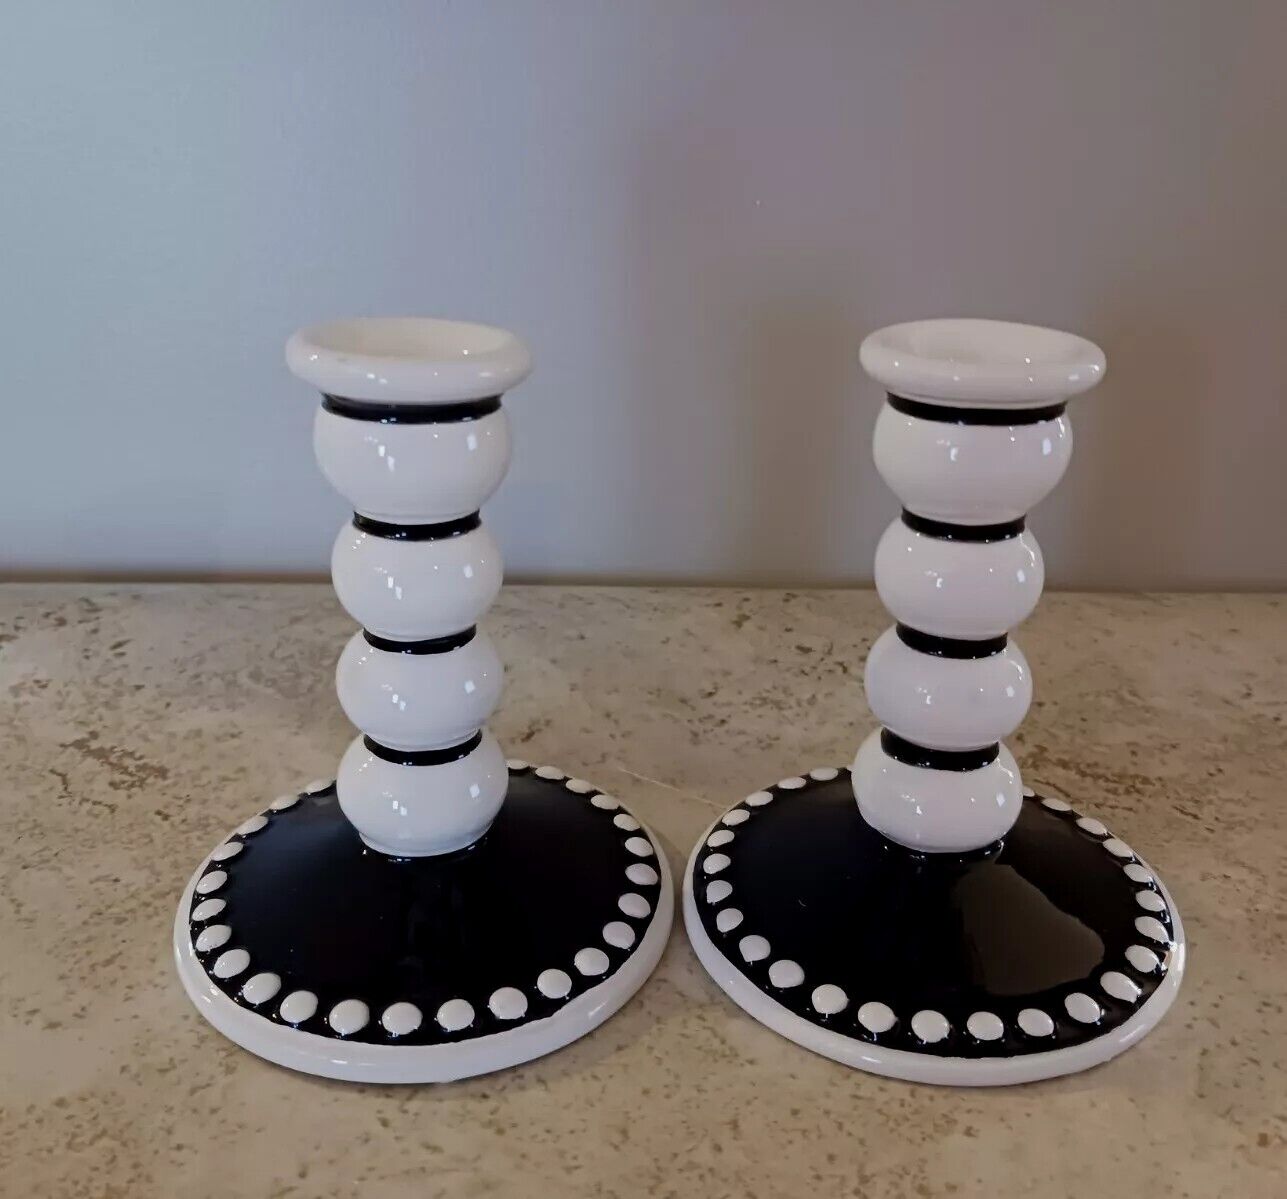 Black & White Candlestick Holders (222 Fifth, China)